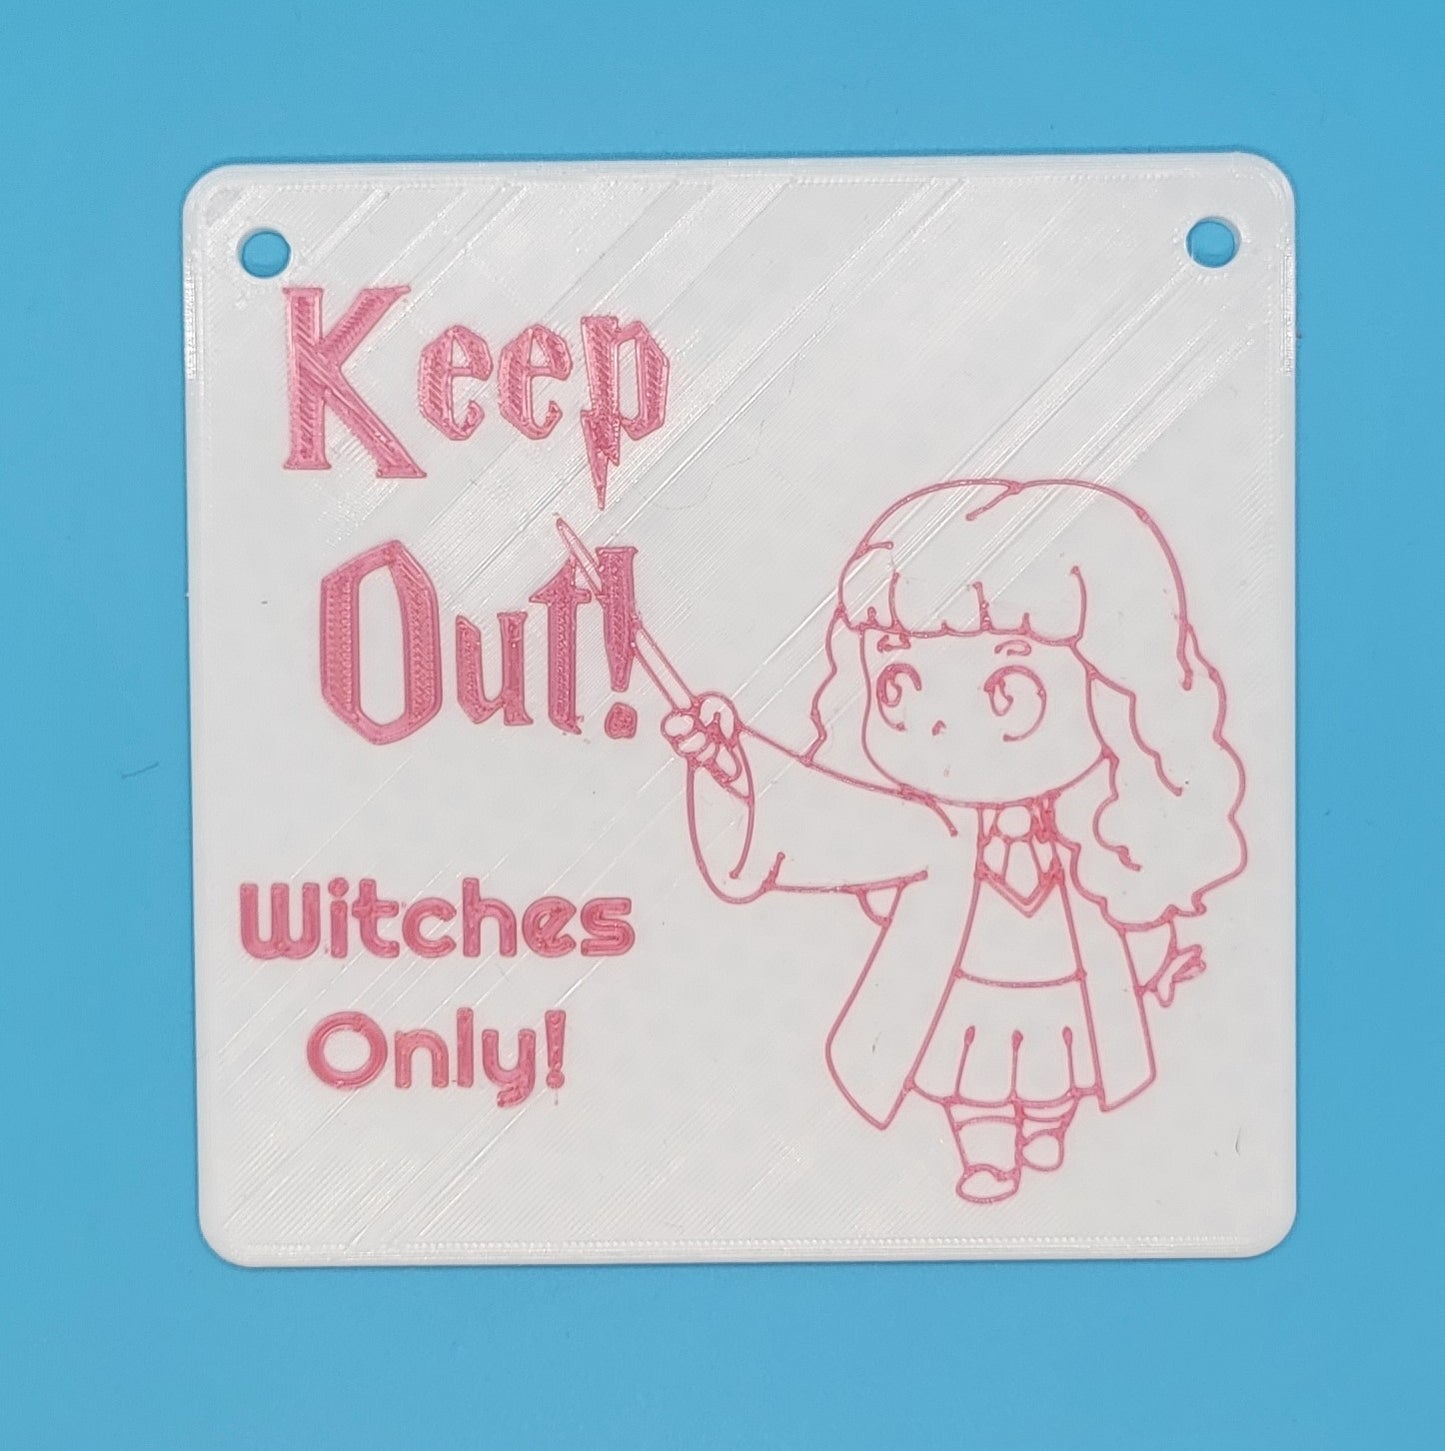 Keep Out! Witches Only! - 3D printed sign